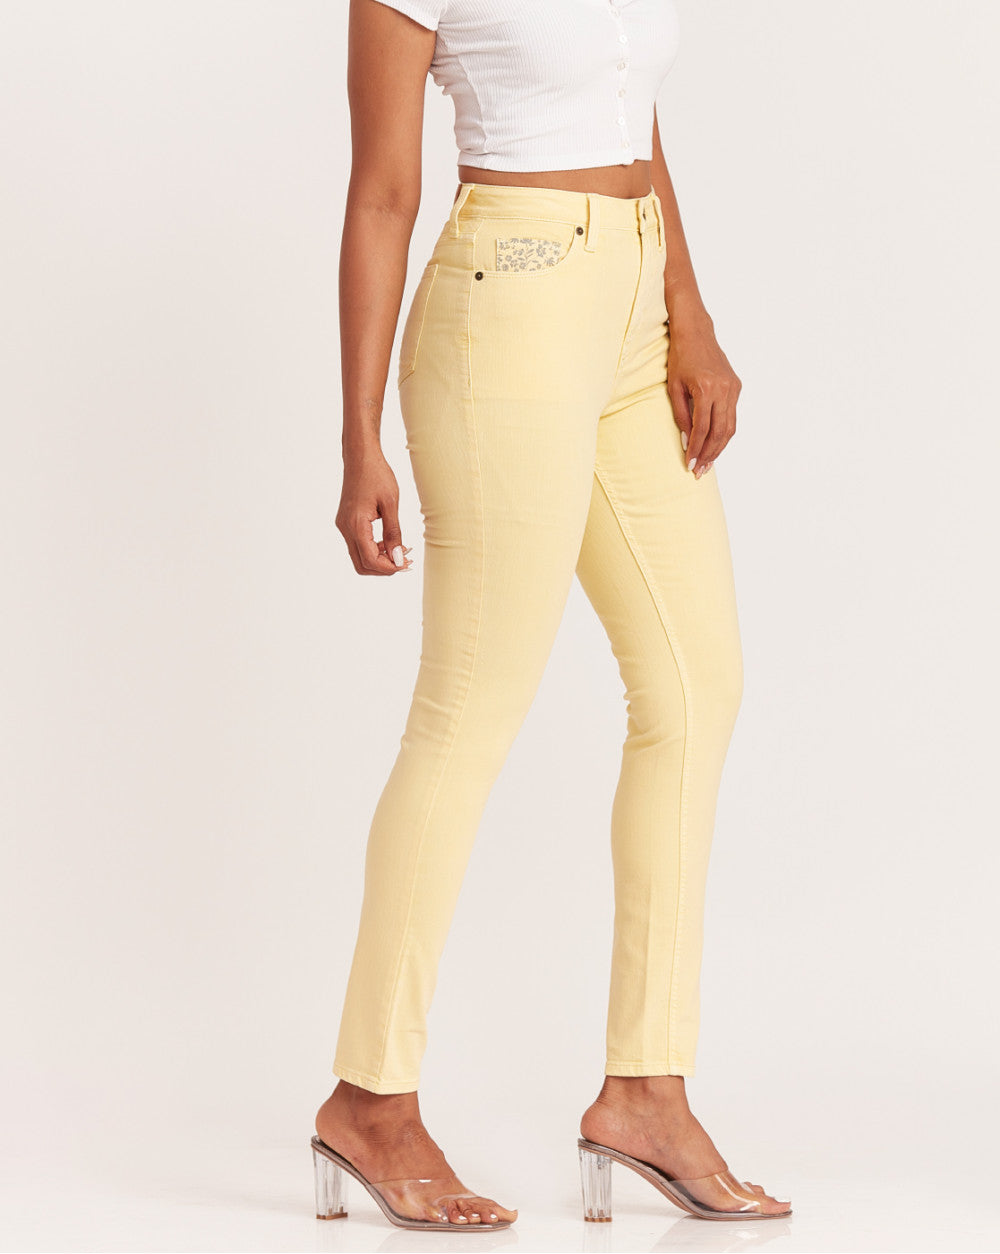 Skinny Fit High Waist Colored Jeans - Daffodil Yellow